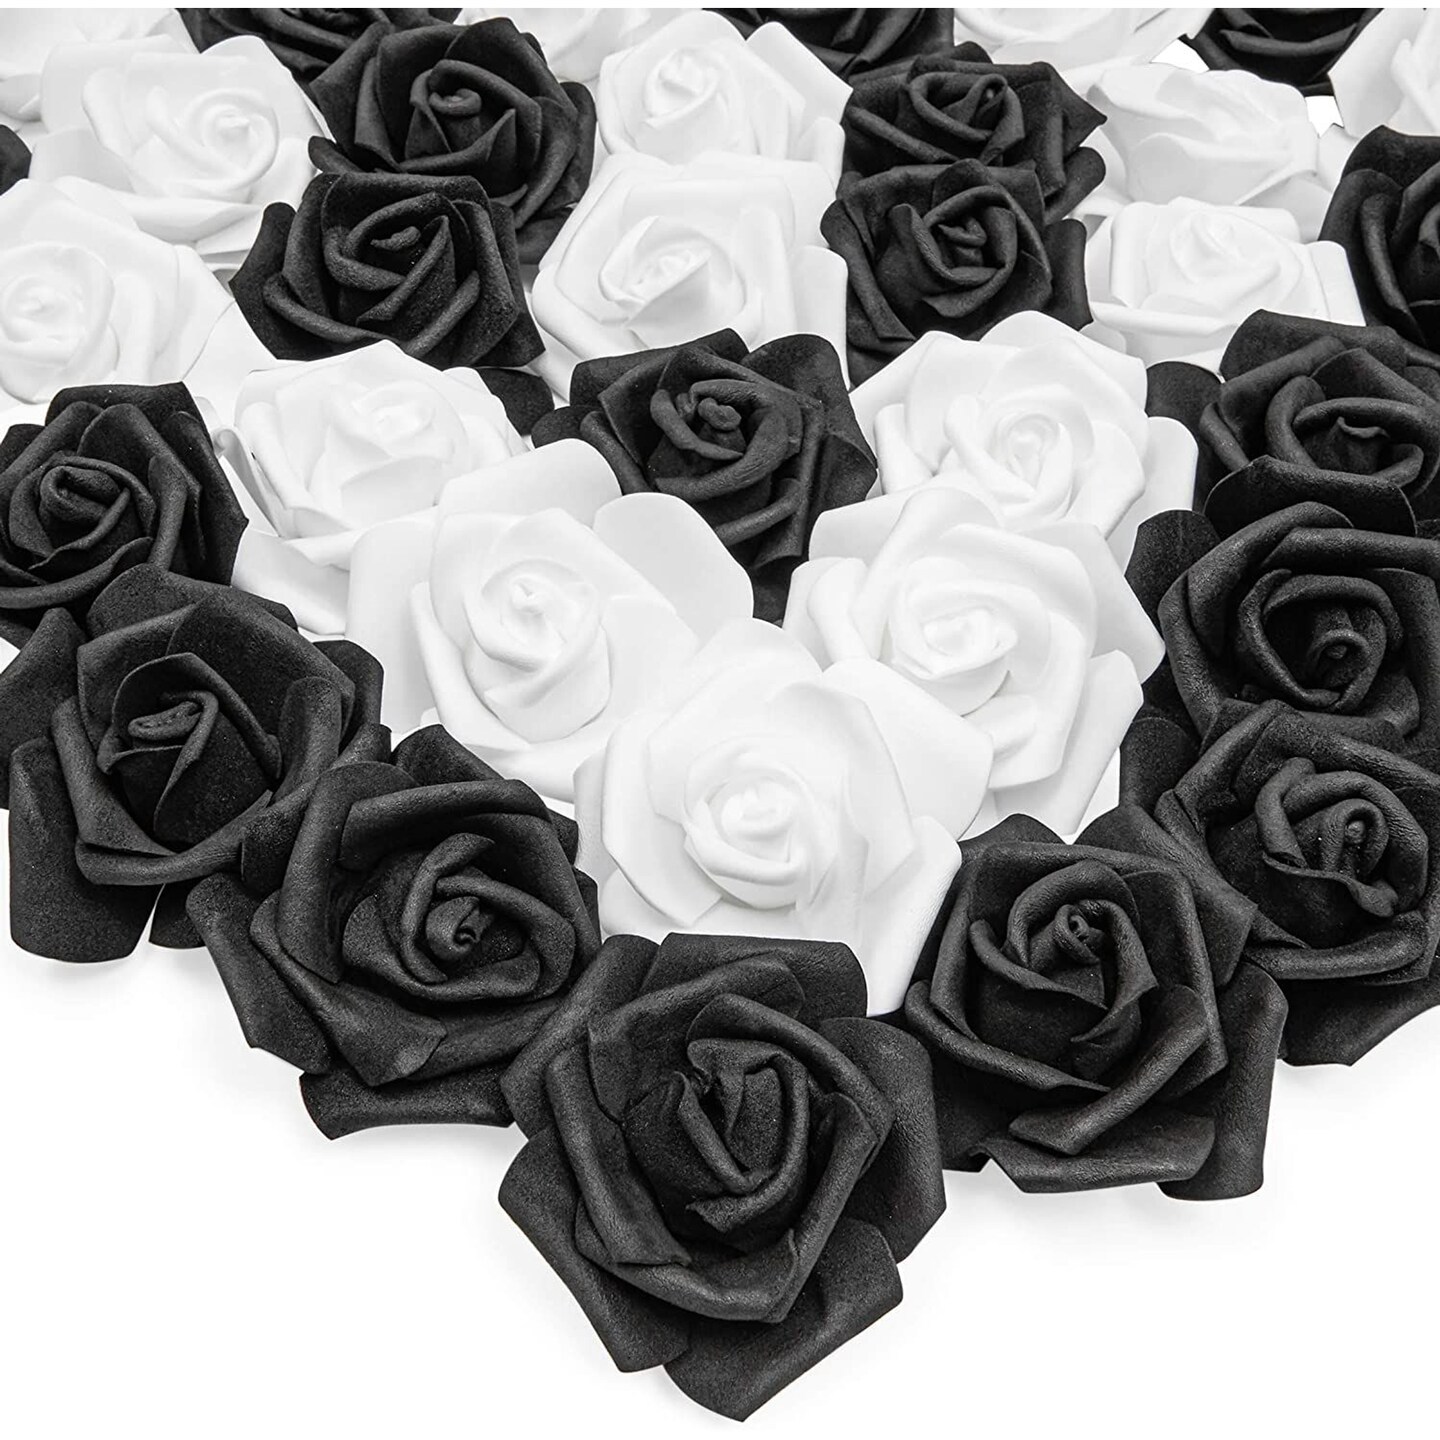 50 Pack Artificial Black Roses for Wedding Decorations, 3 Inch Stemless  Silk Flower Heads for Wall Art, DIY Crafts